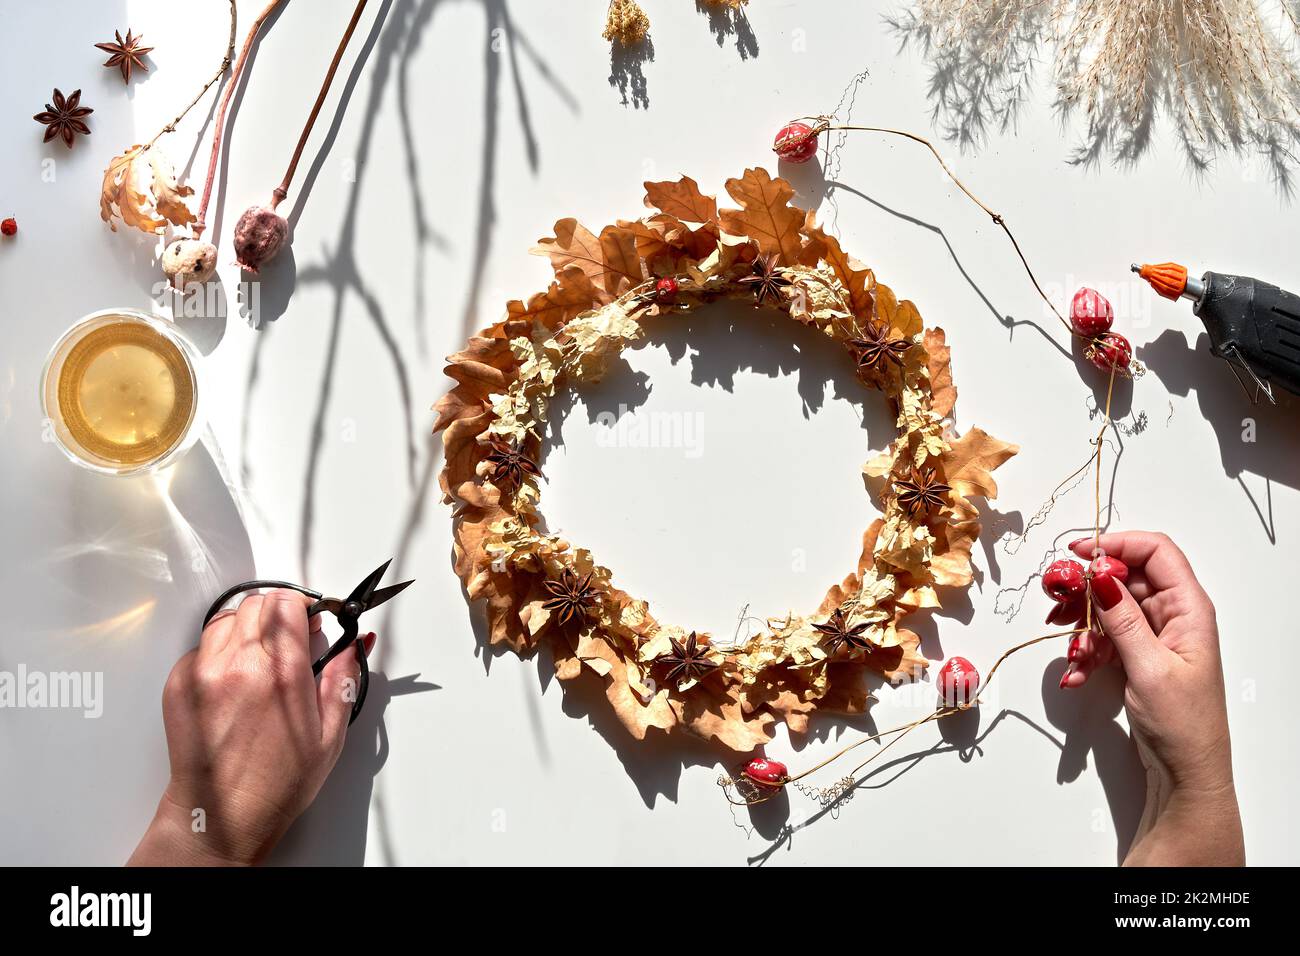 Hands making dried floral wreath from dry Autumn leaves and Fall berries. Hands with manicured nails fix decorations with glue gun. Stock Photo